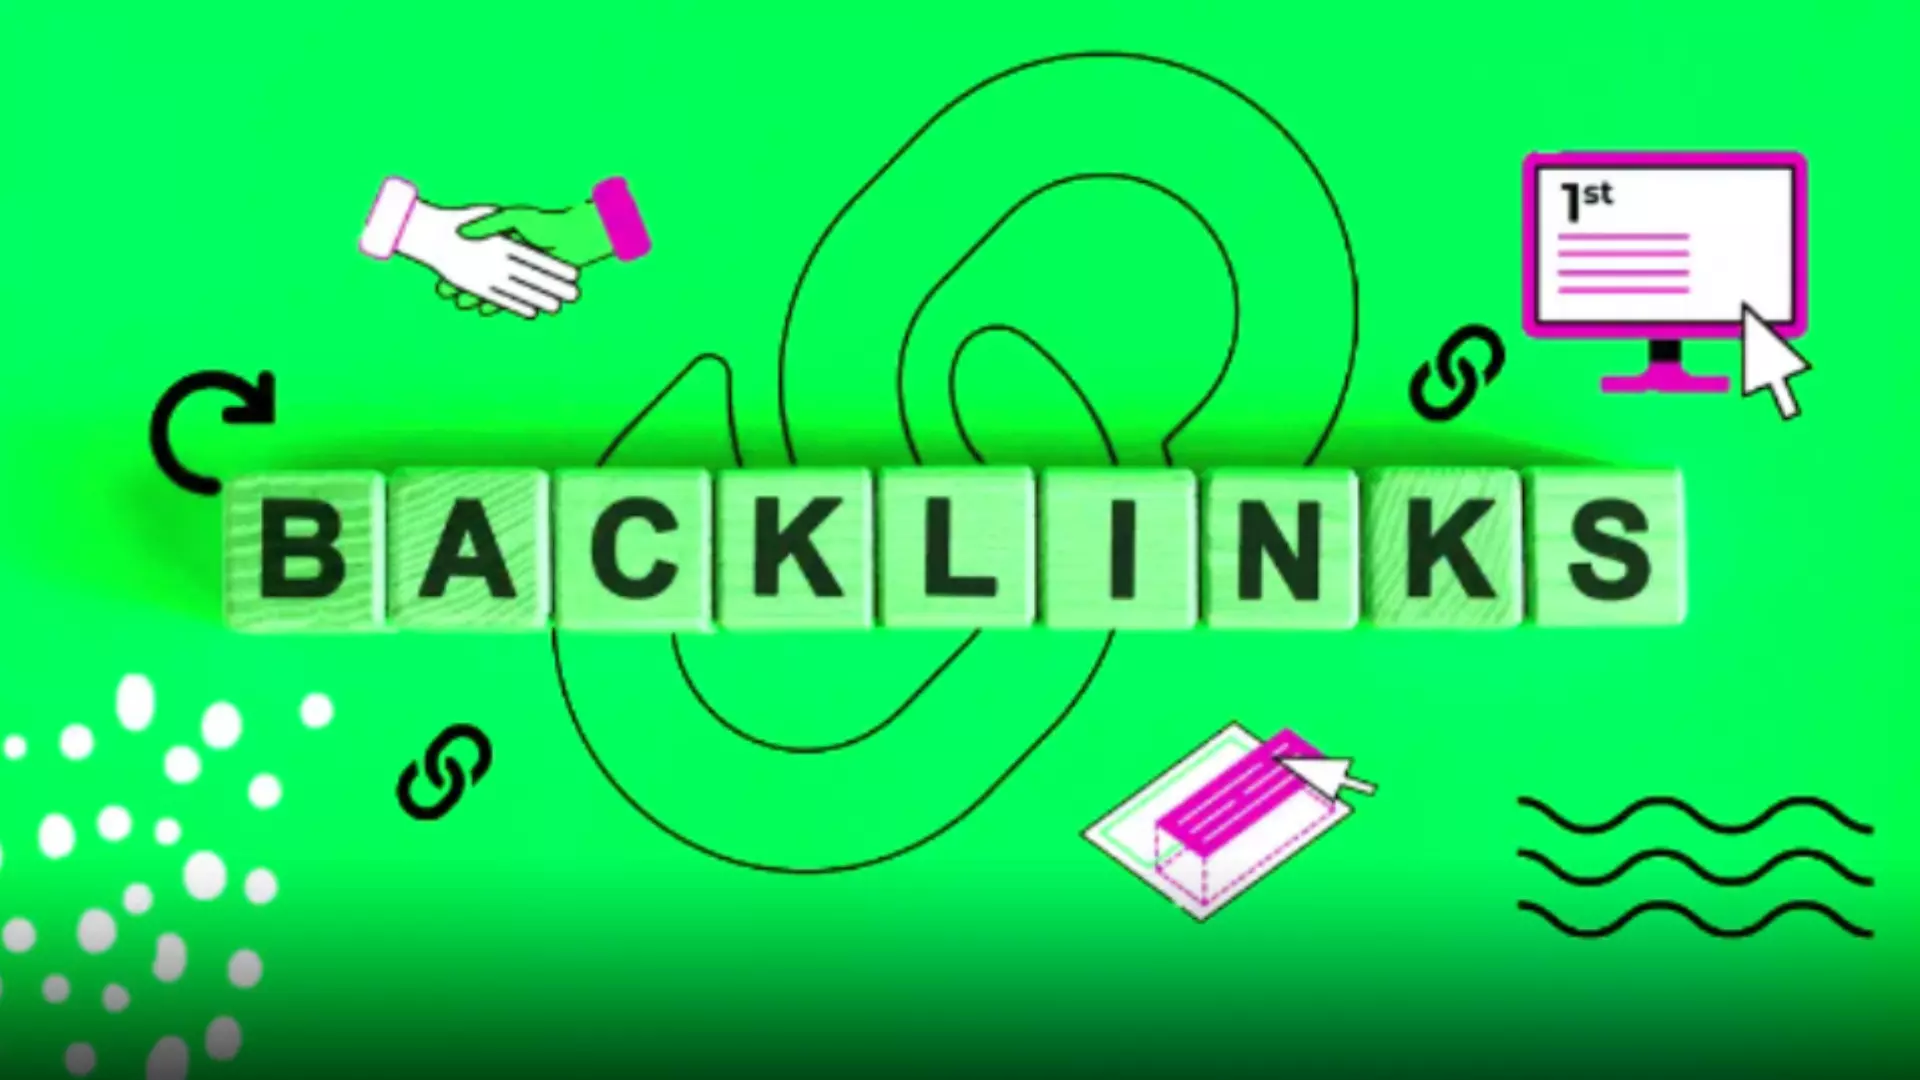 How mutual backlinks can benefit your SEO